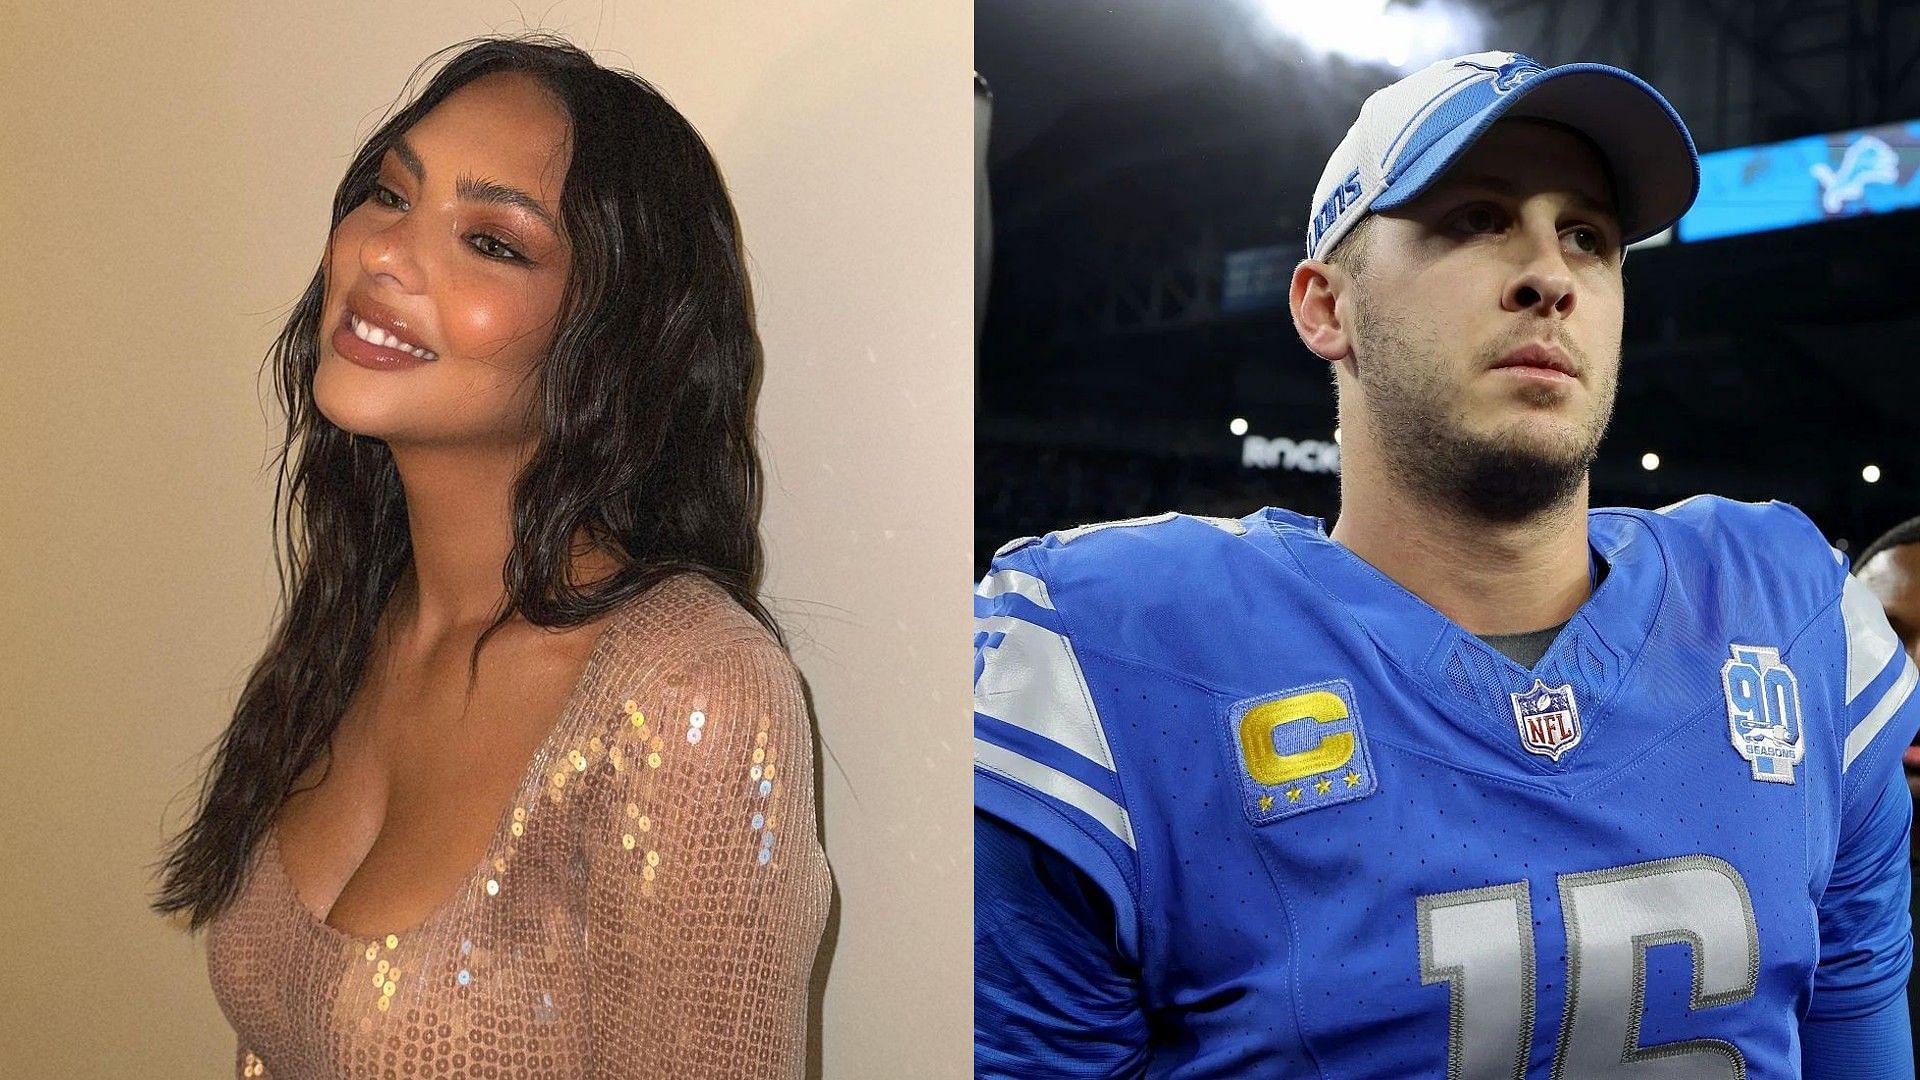 Jared Goff&rsquo;s girlfriend Christen Harper captures &lsquo;unbelievable&rsquo; moment as Lions end 32-year playoff win drought